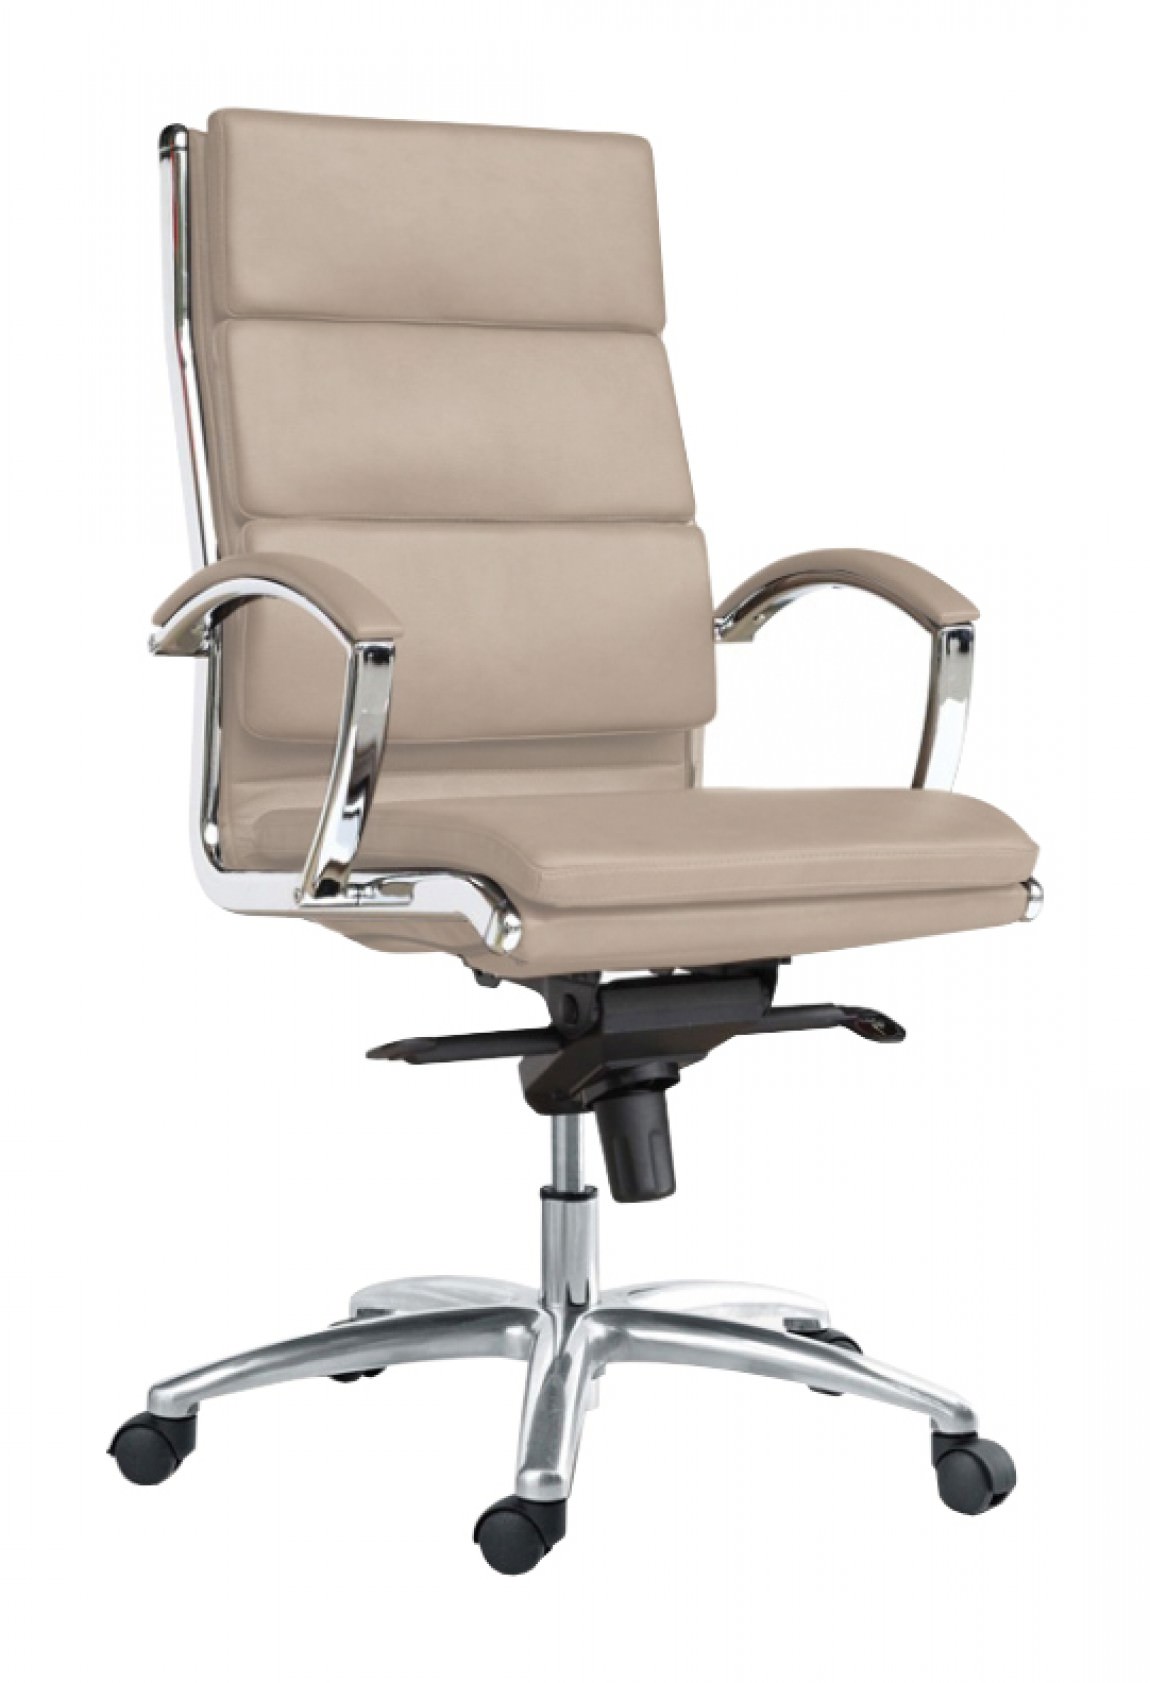 Leather High Back Conference Room Chair